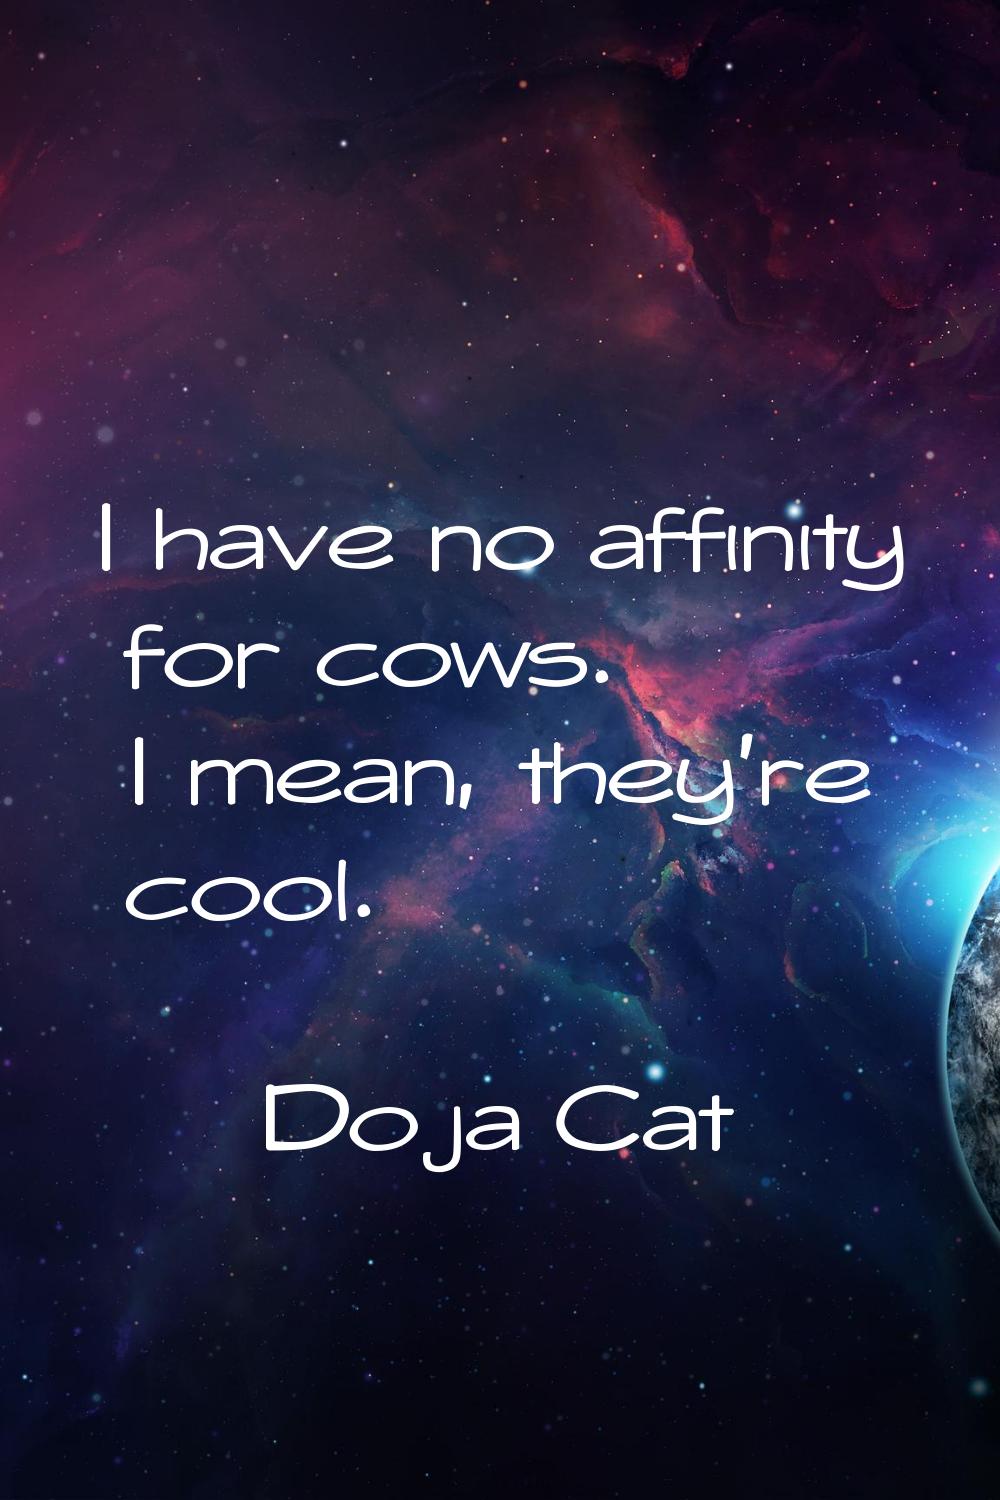 I have no affinity for cows. I mean, they're cool.